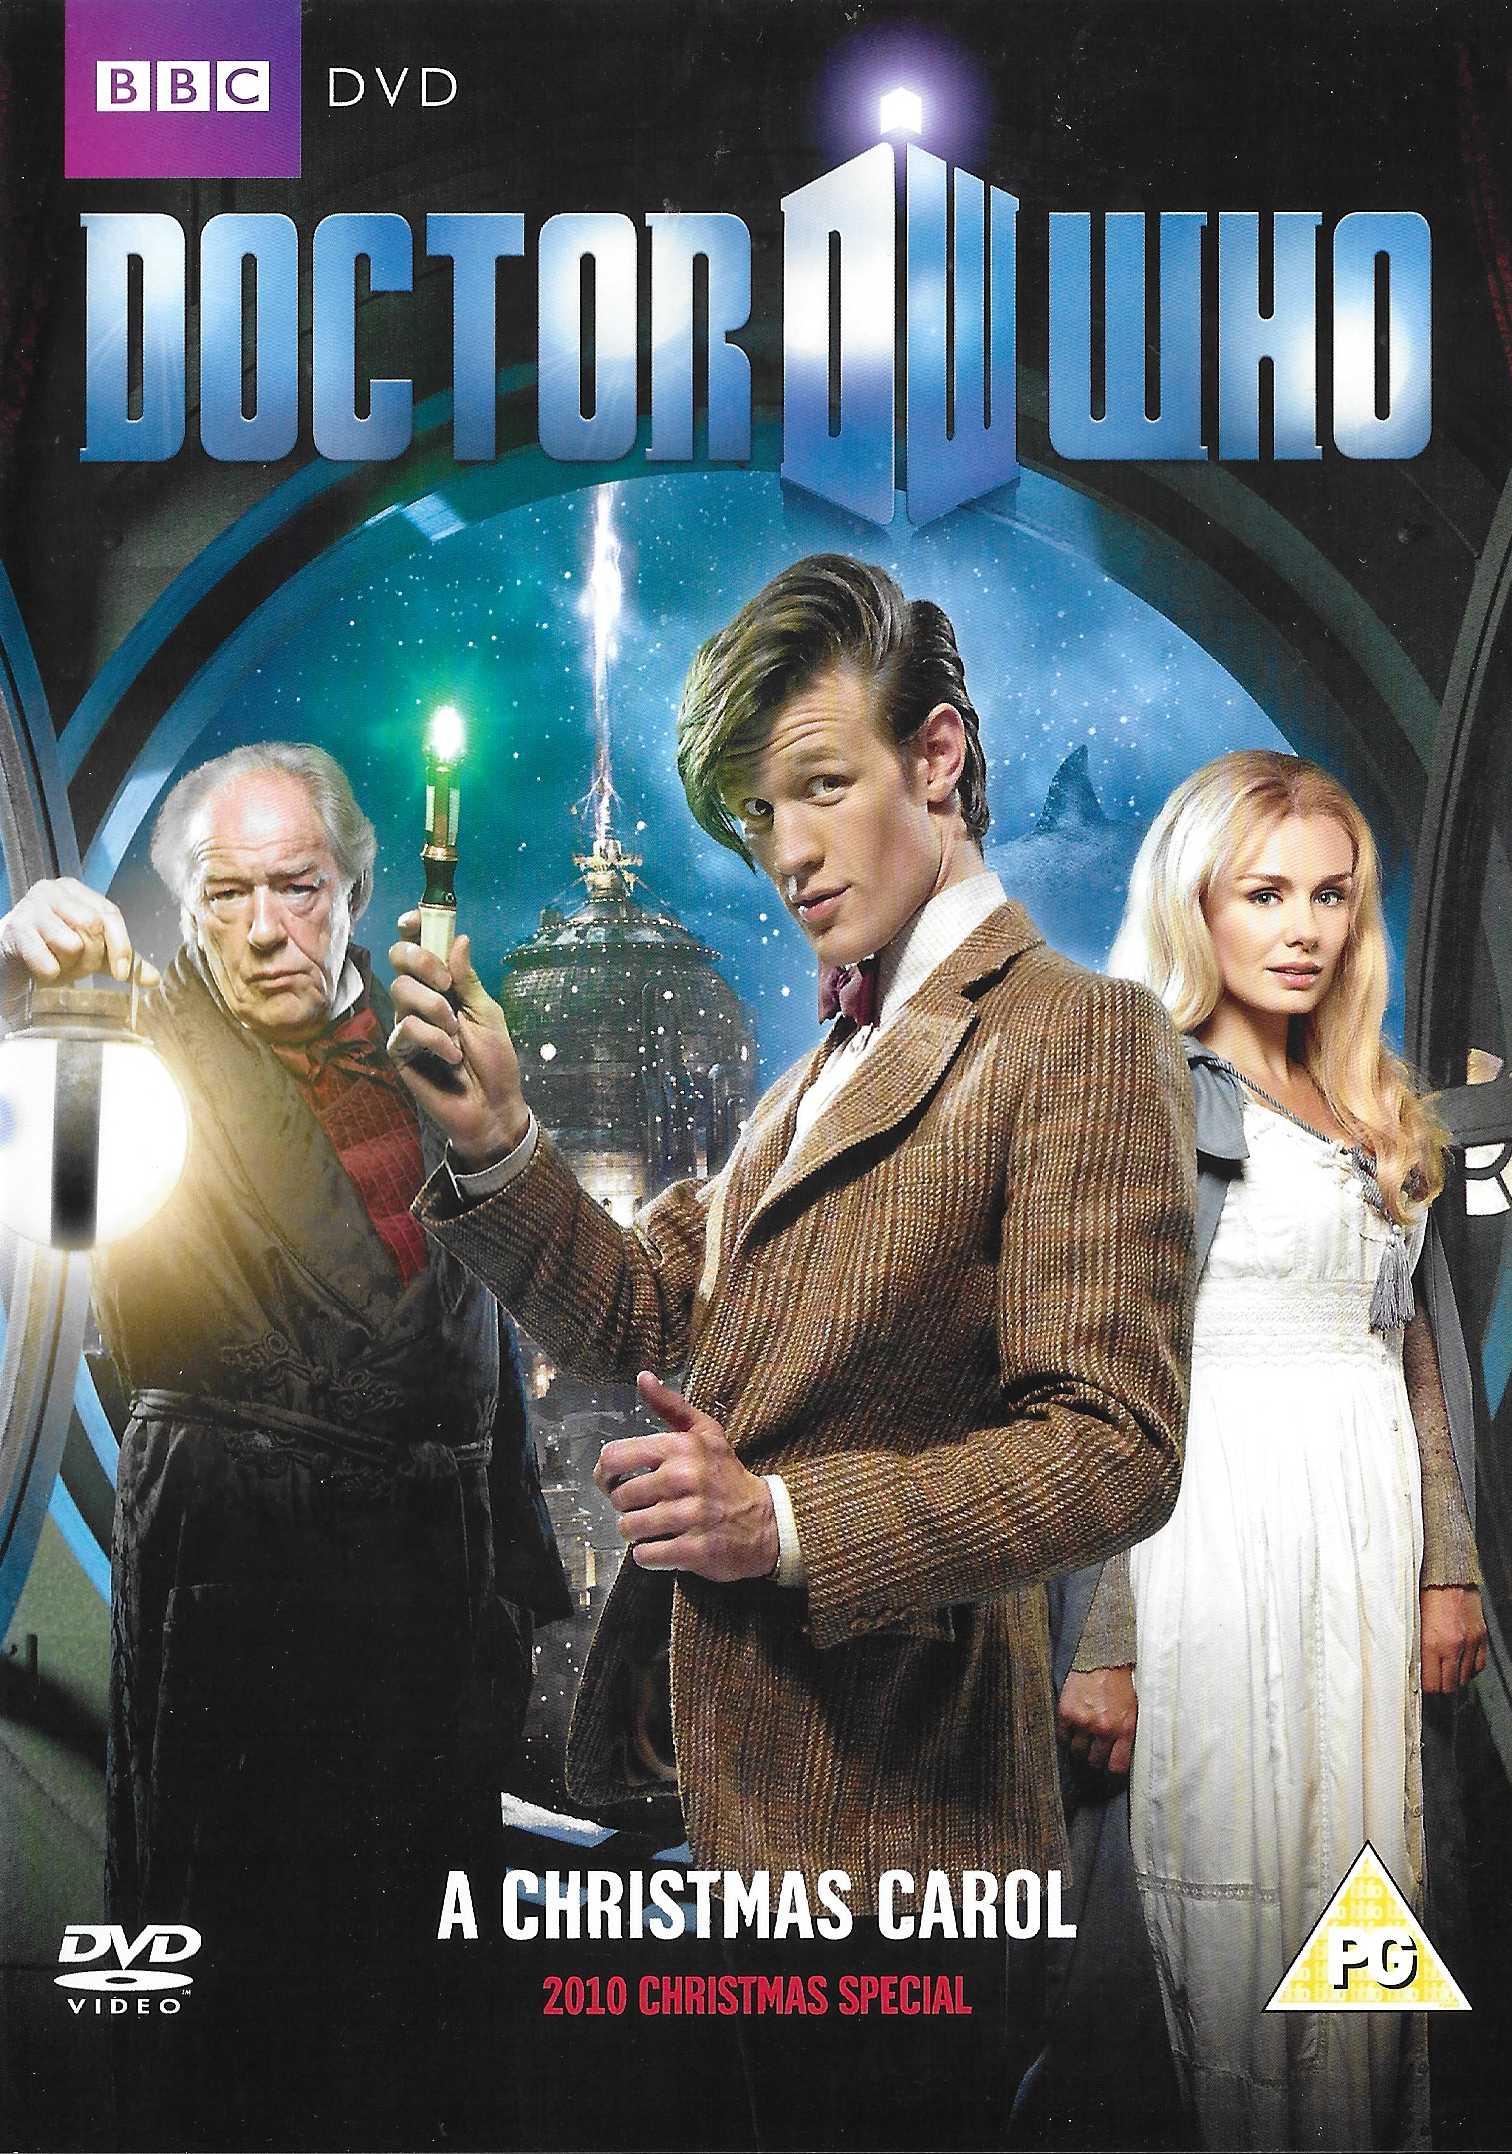 Picture of BBCDVD 3346 Doctor Who - A Christmas carol by artist Steven Moffat from the BBC records and Tapes library